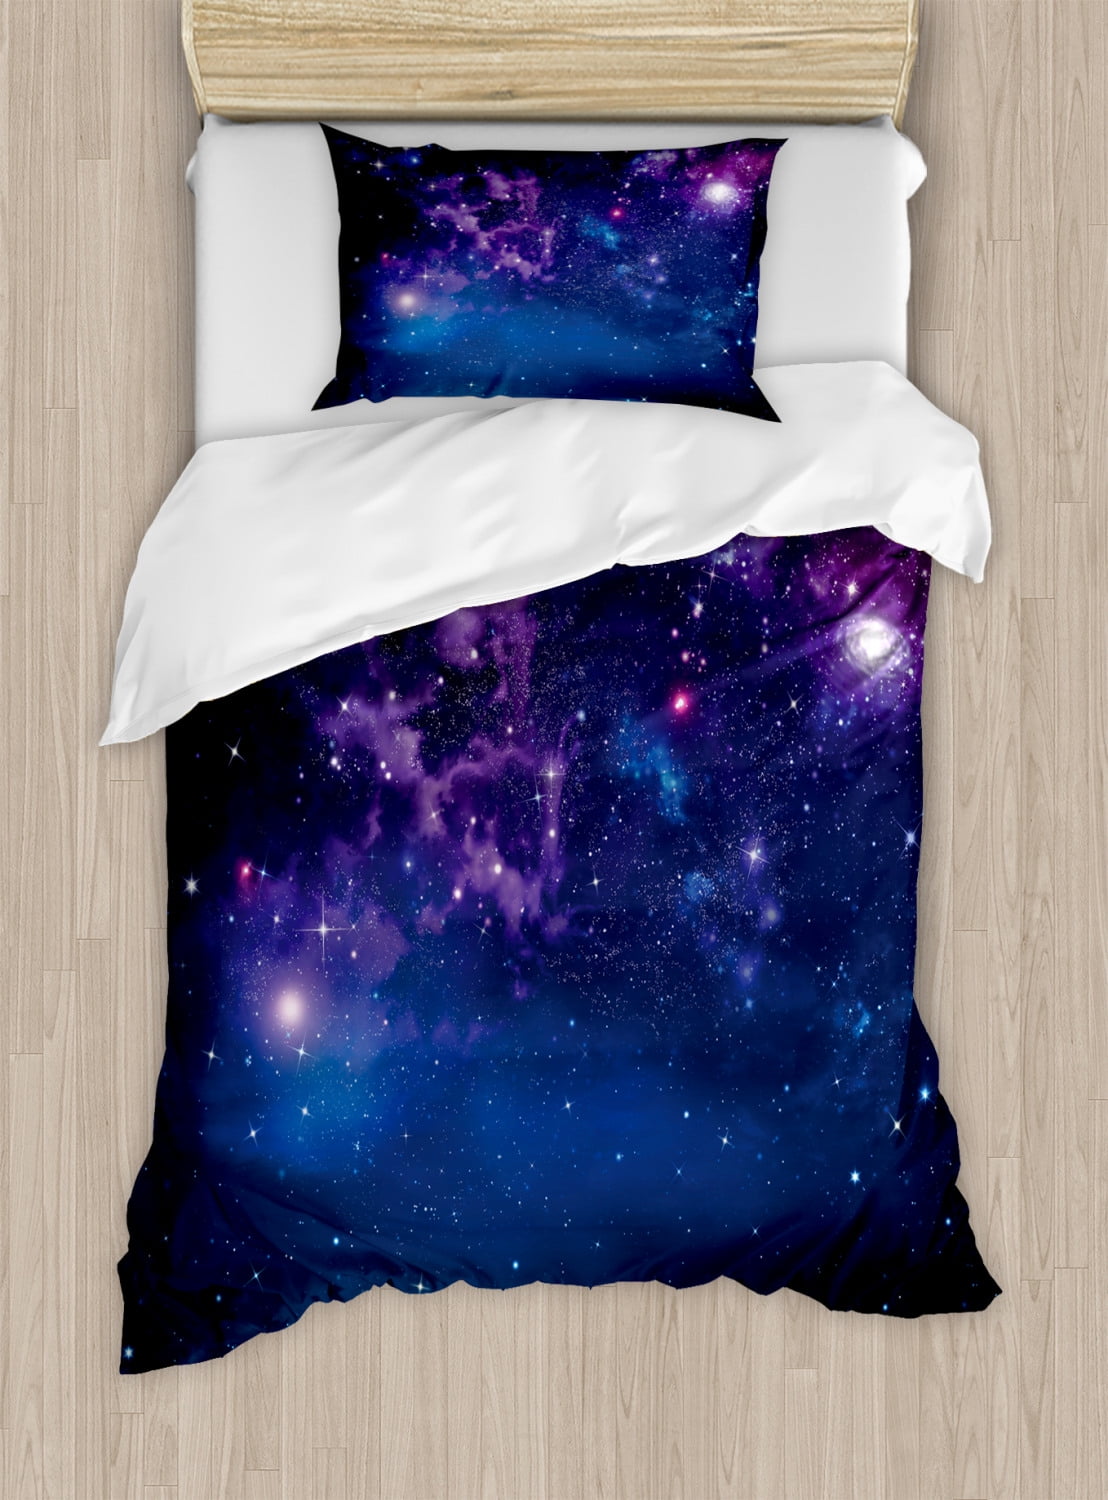 Space Duvet Cover Set Milky Way Themed Dark Matter With Star